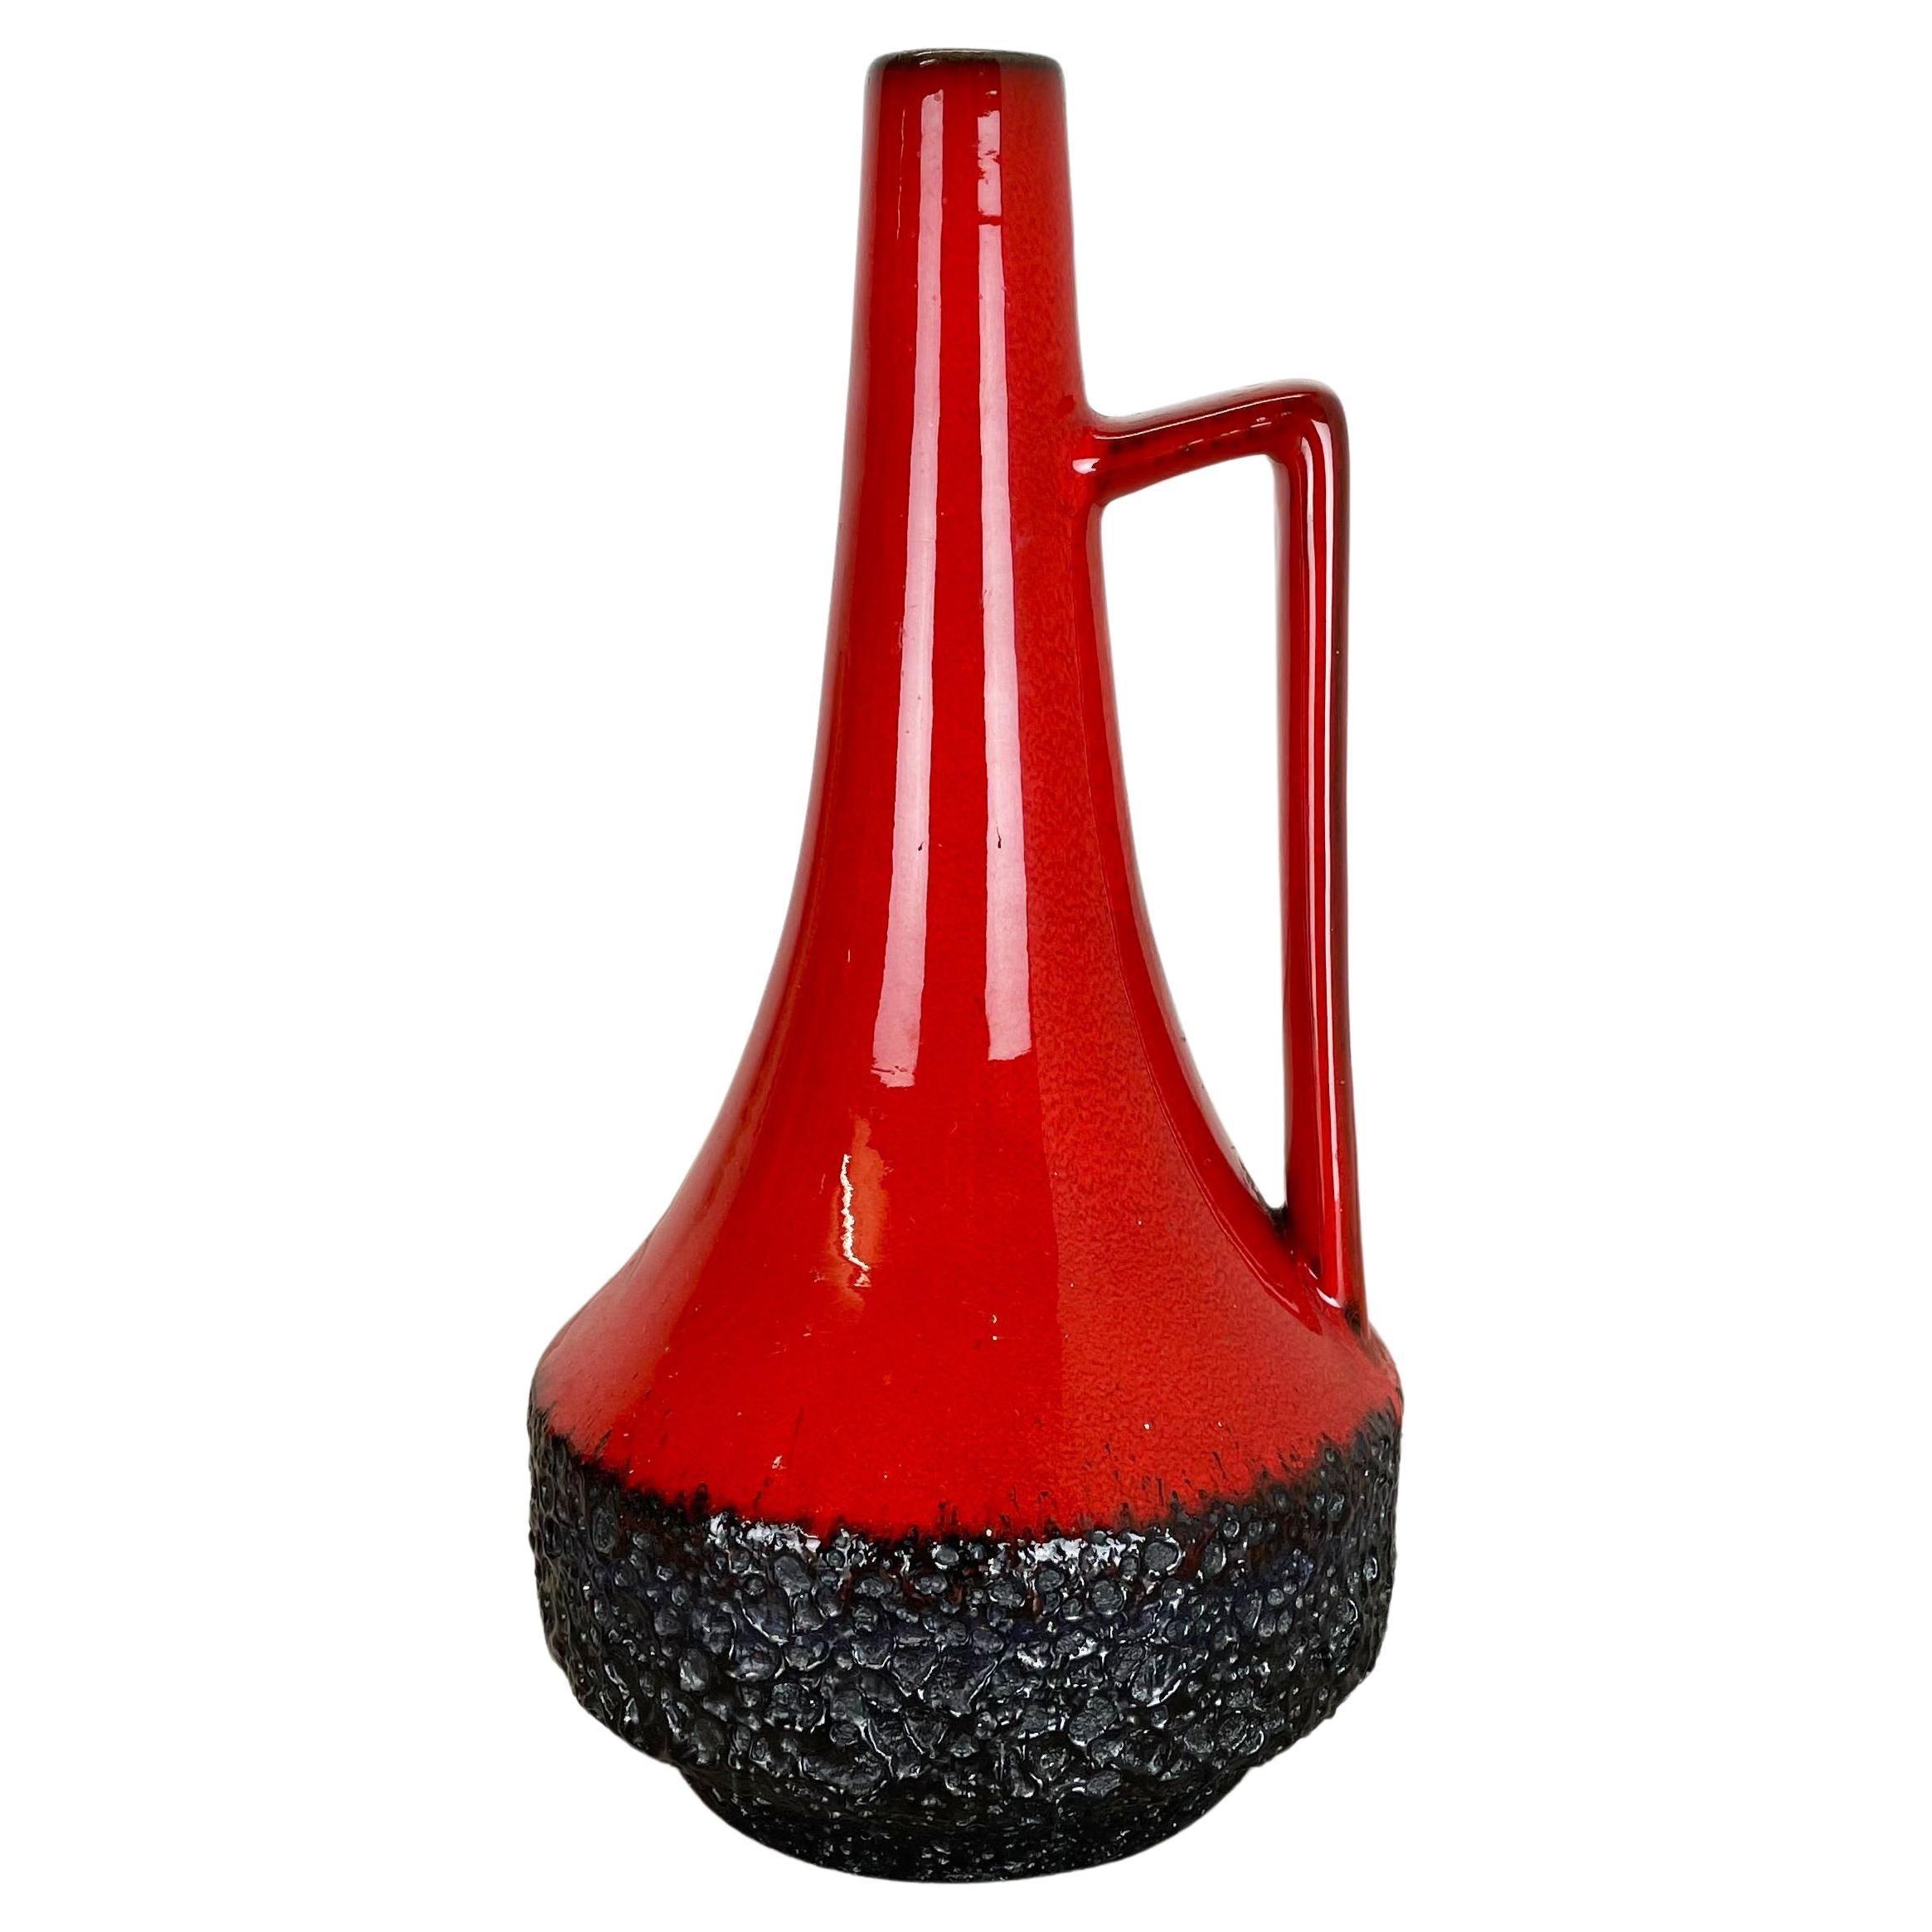 XL Colorful Fat Lava Pottery "Black-Red" Vase by Jopeko Ceramics, Germany, 1970s For Sale